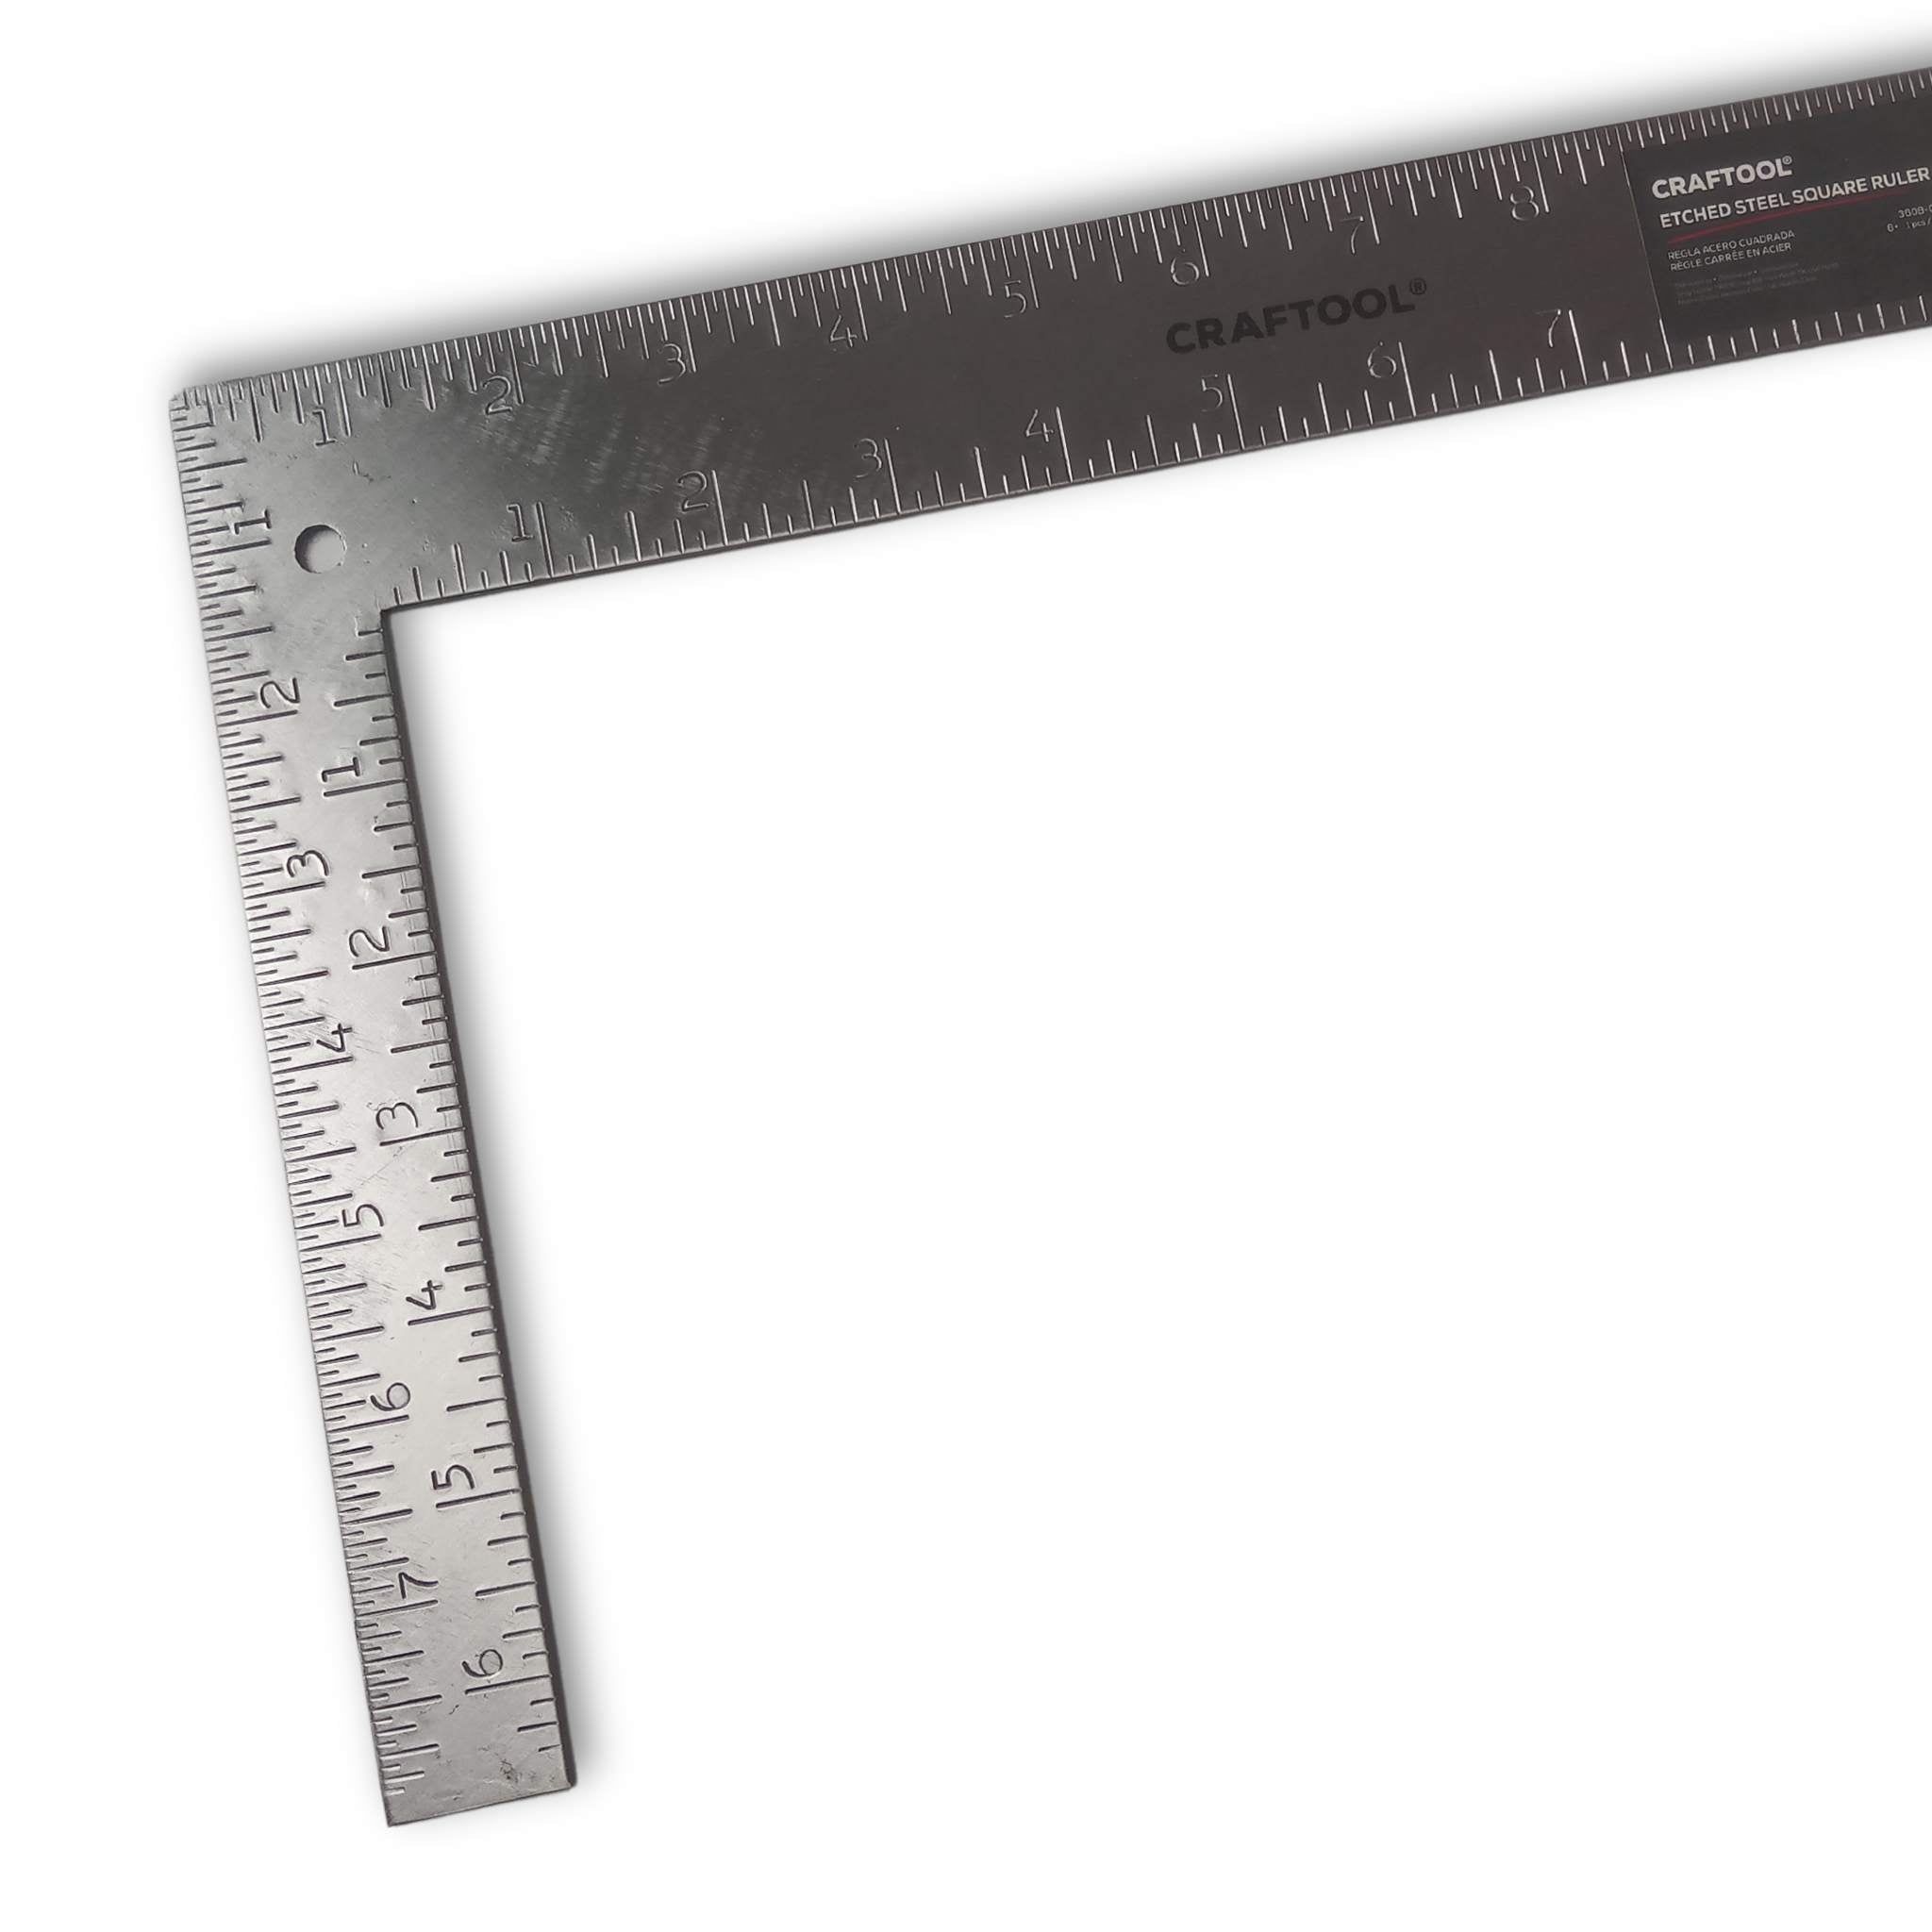 Engraved tempered steel ruler to aid with cutting right angled corners and square and rectangle cuts